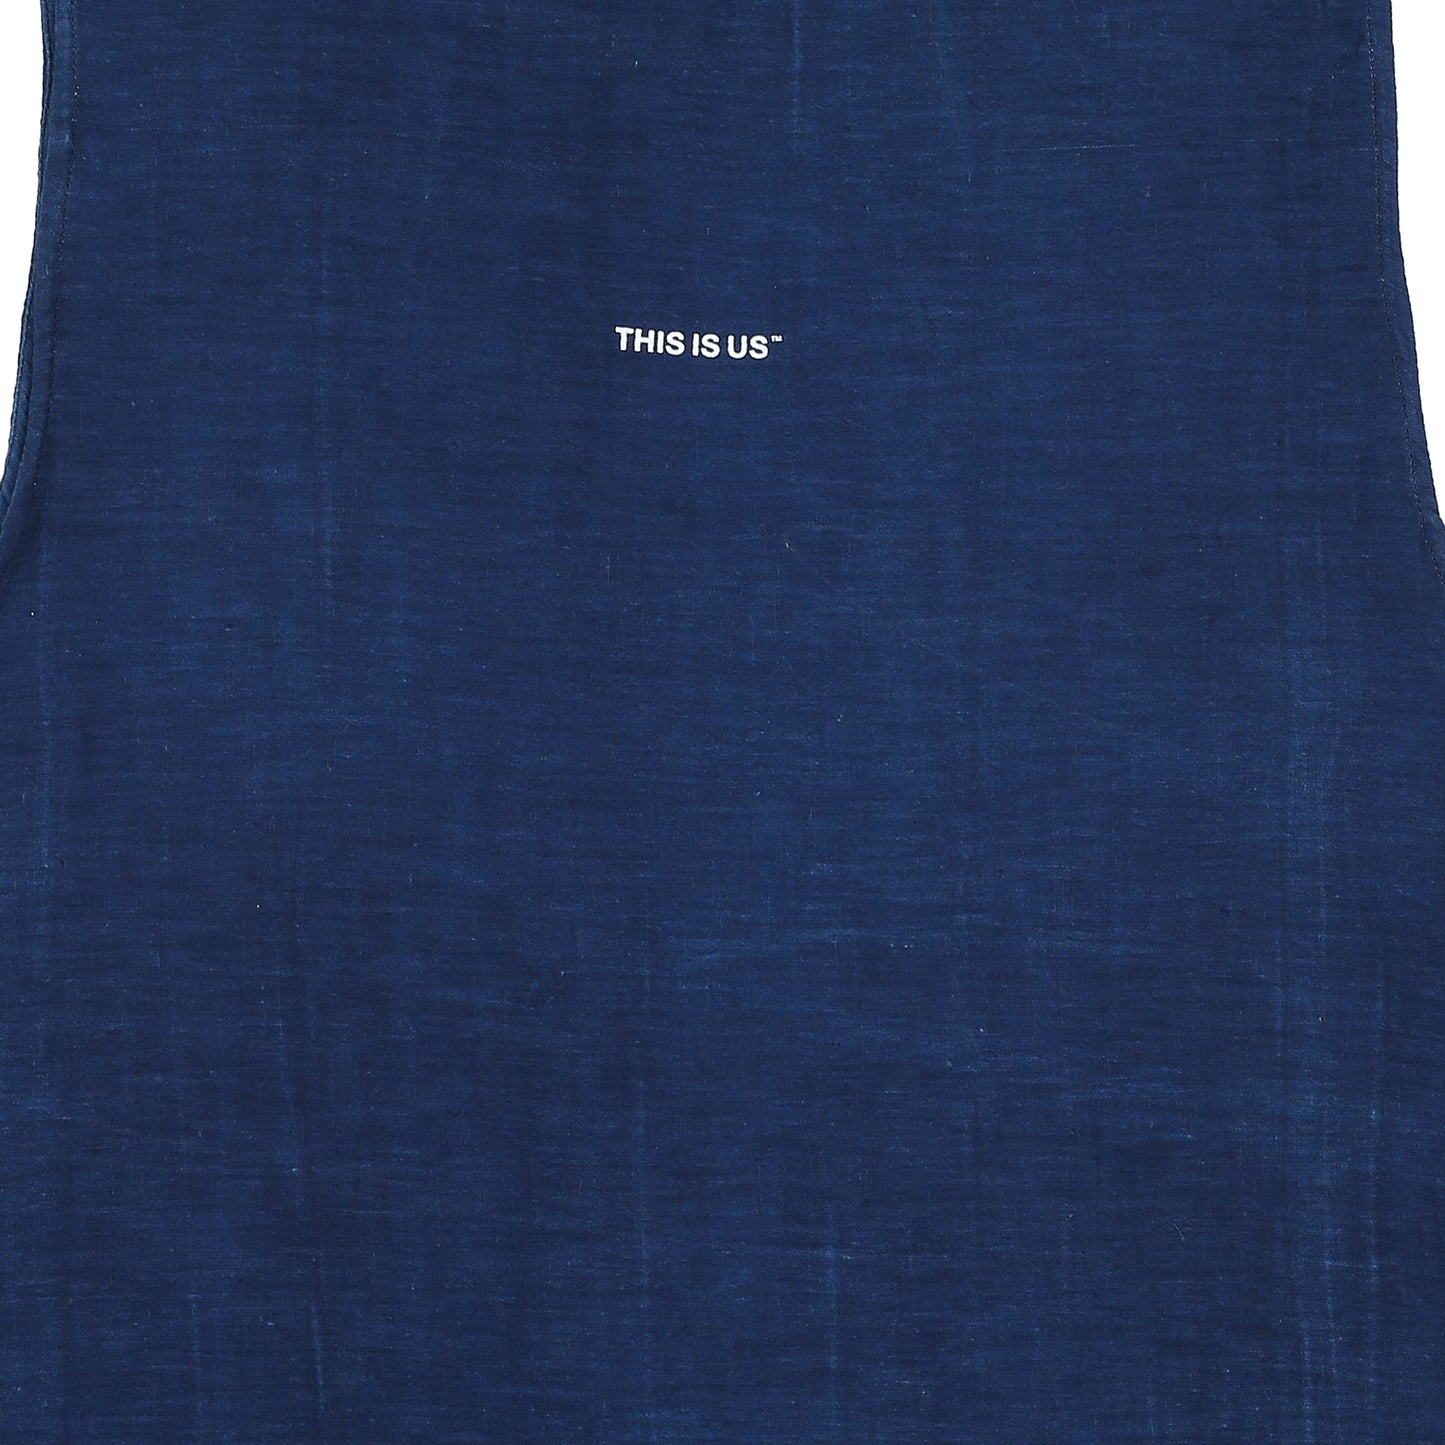 THIS IS US Logo Vest